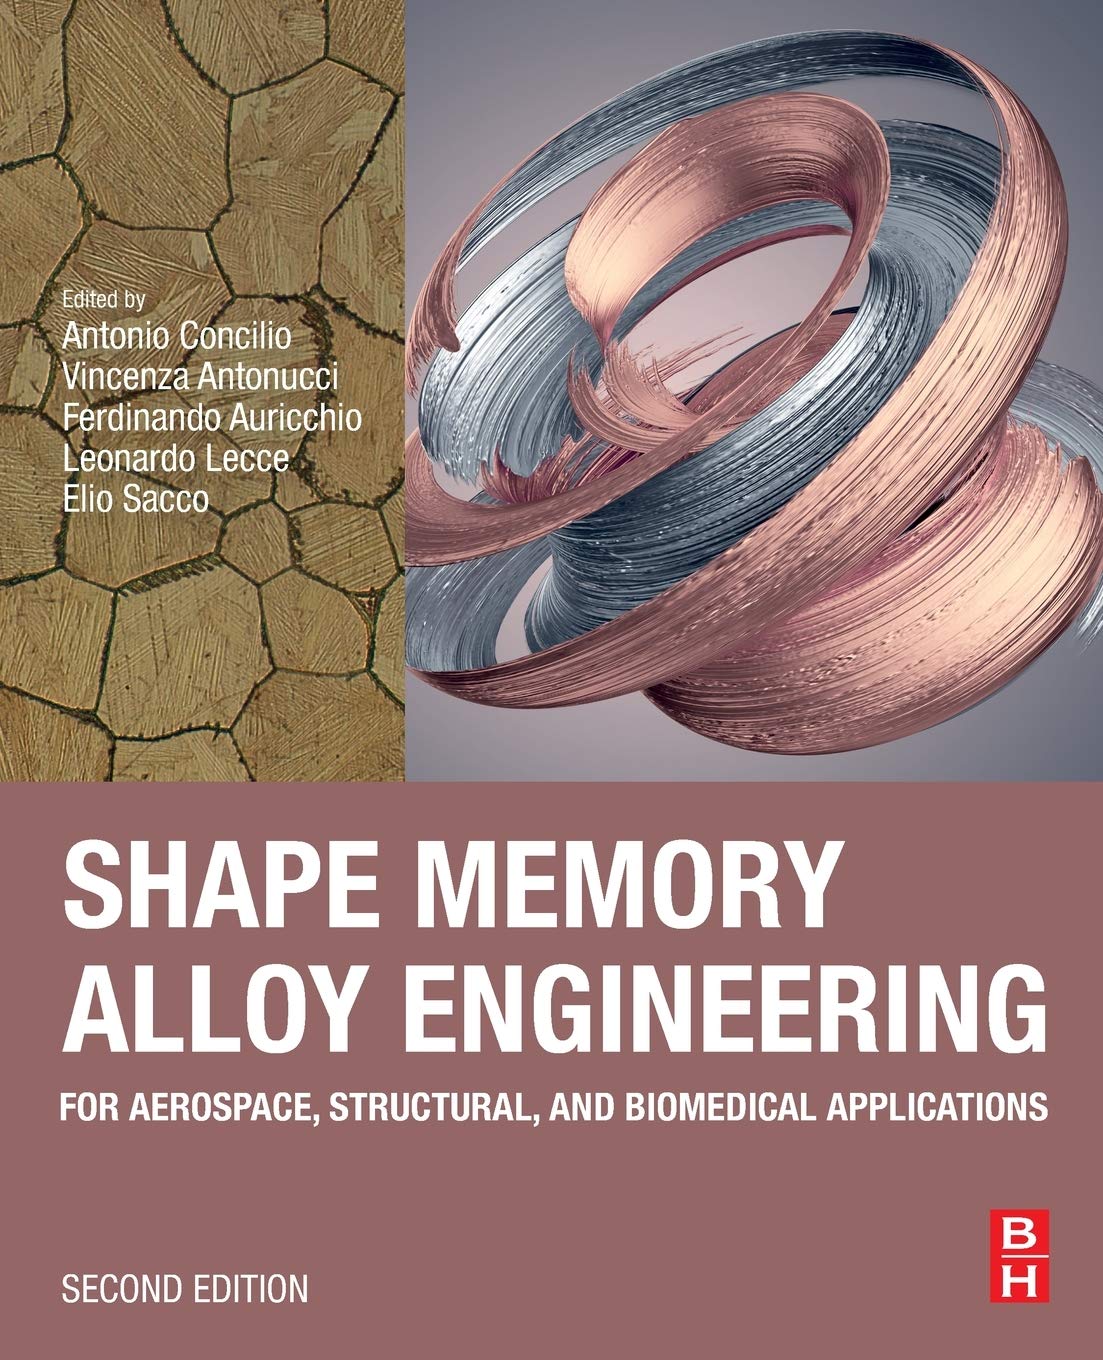 phd thesis on shape memory alloy